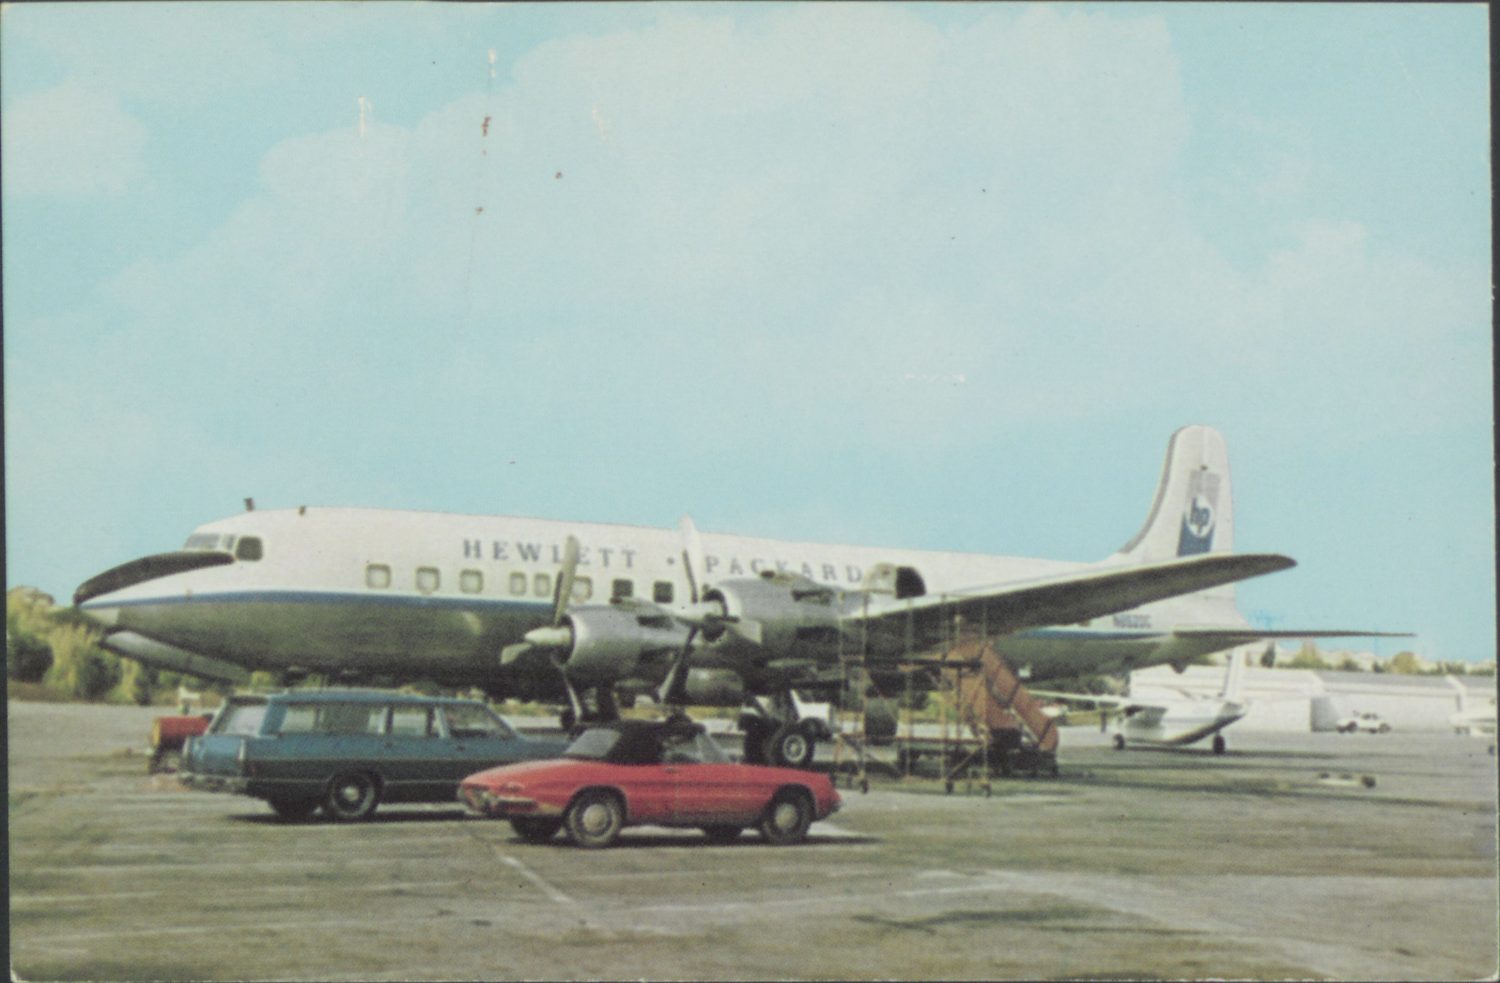 The Douglass DC-6B airplane custom-outfitted as the Flying Demonstration Lab for Hewlett-Packard.